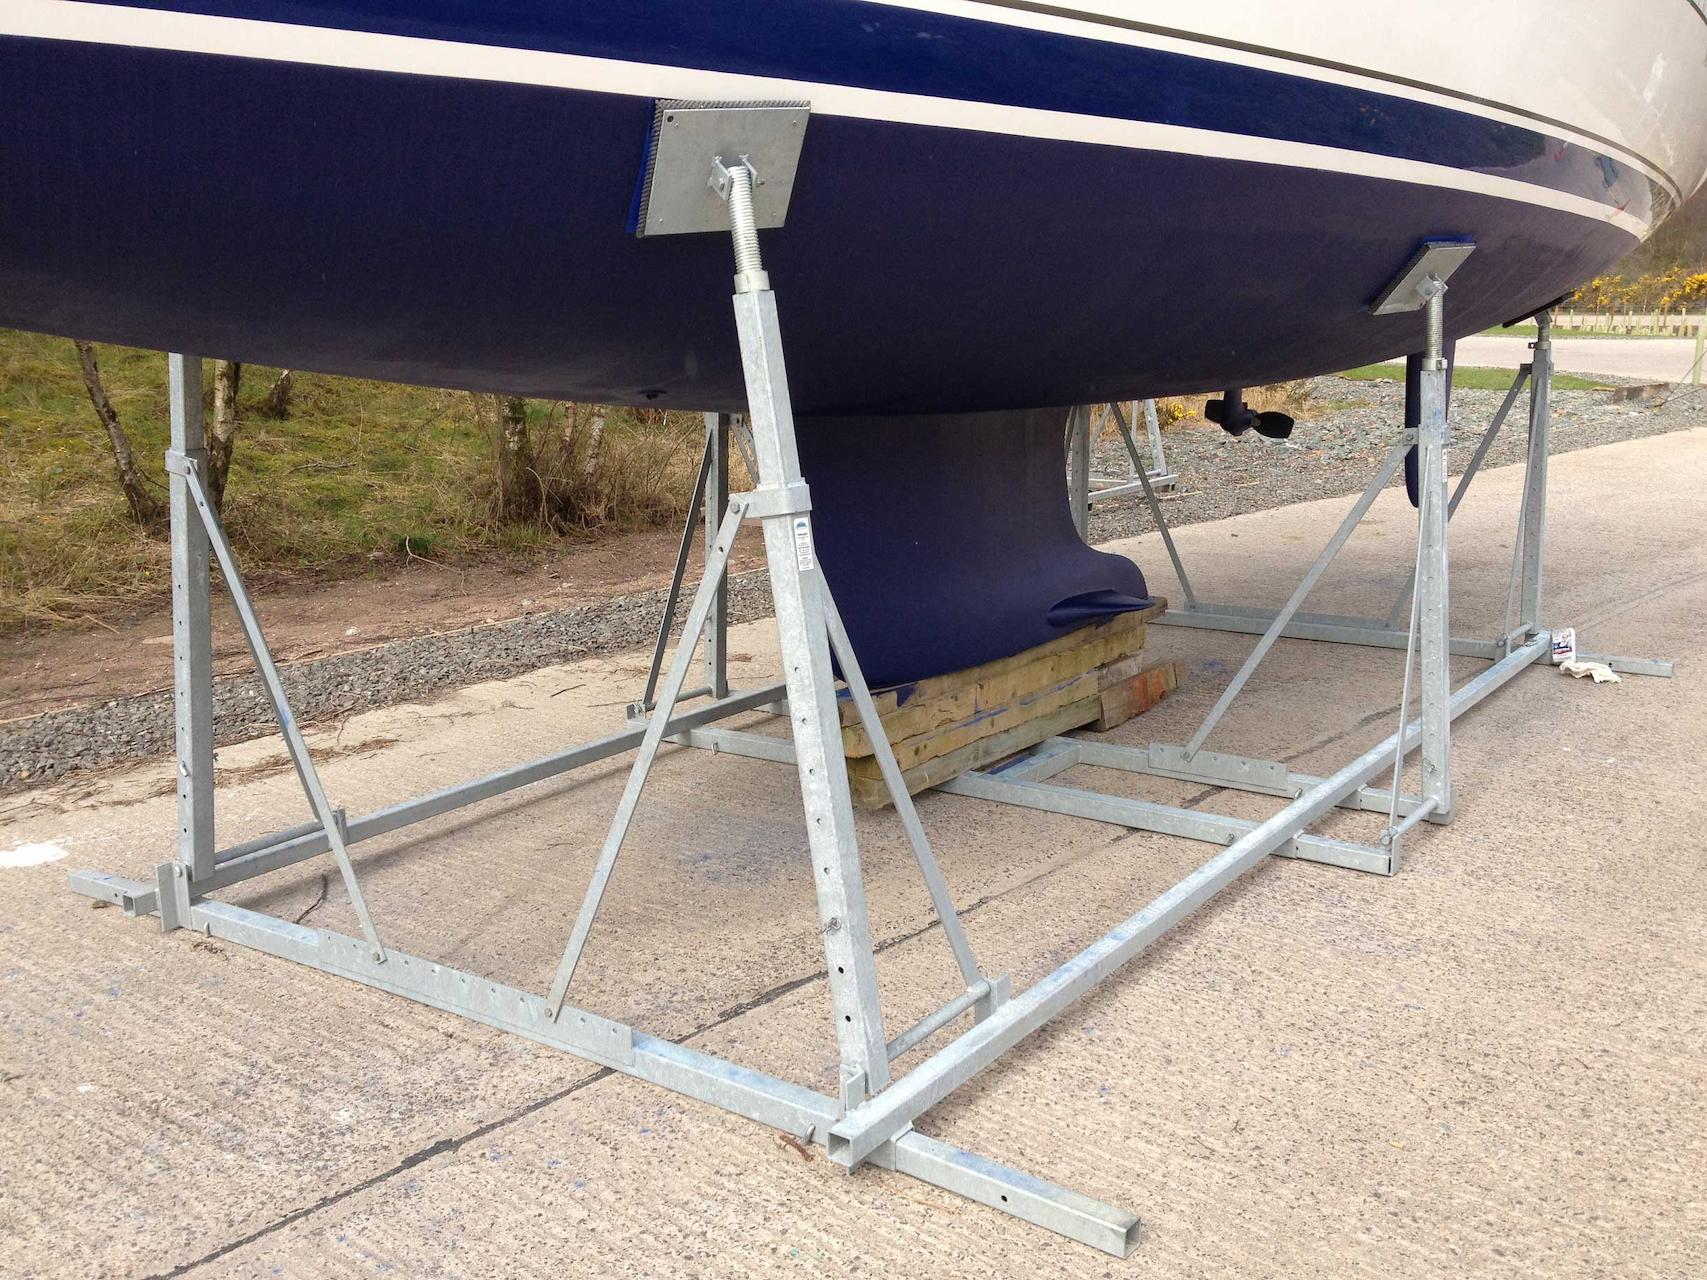 How To Get Your First Yacht Cradle?